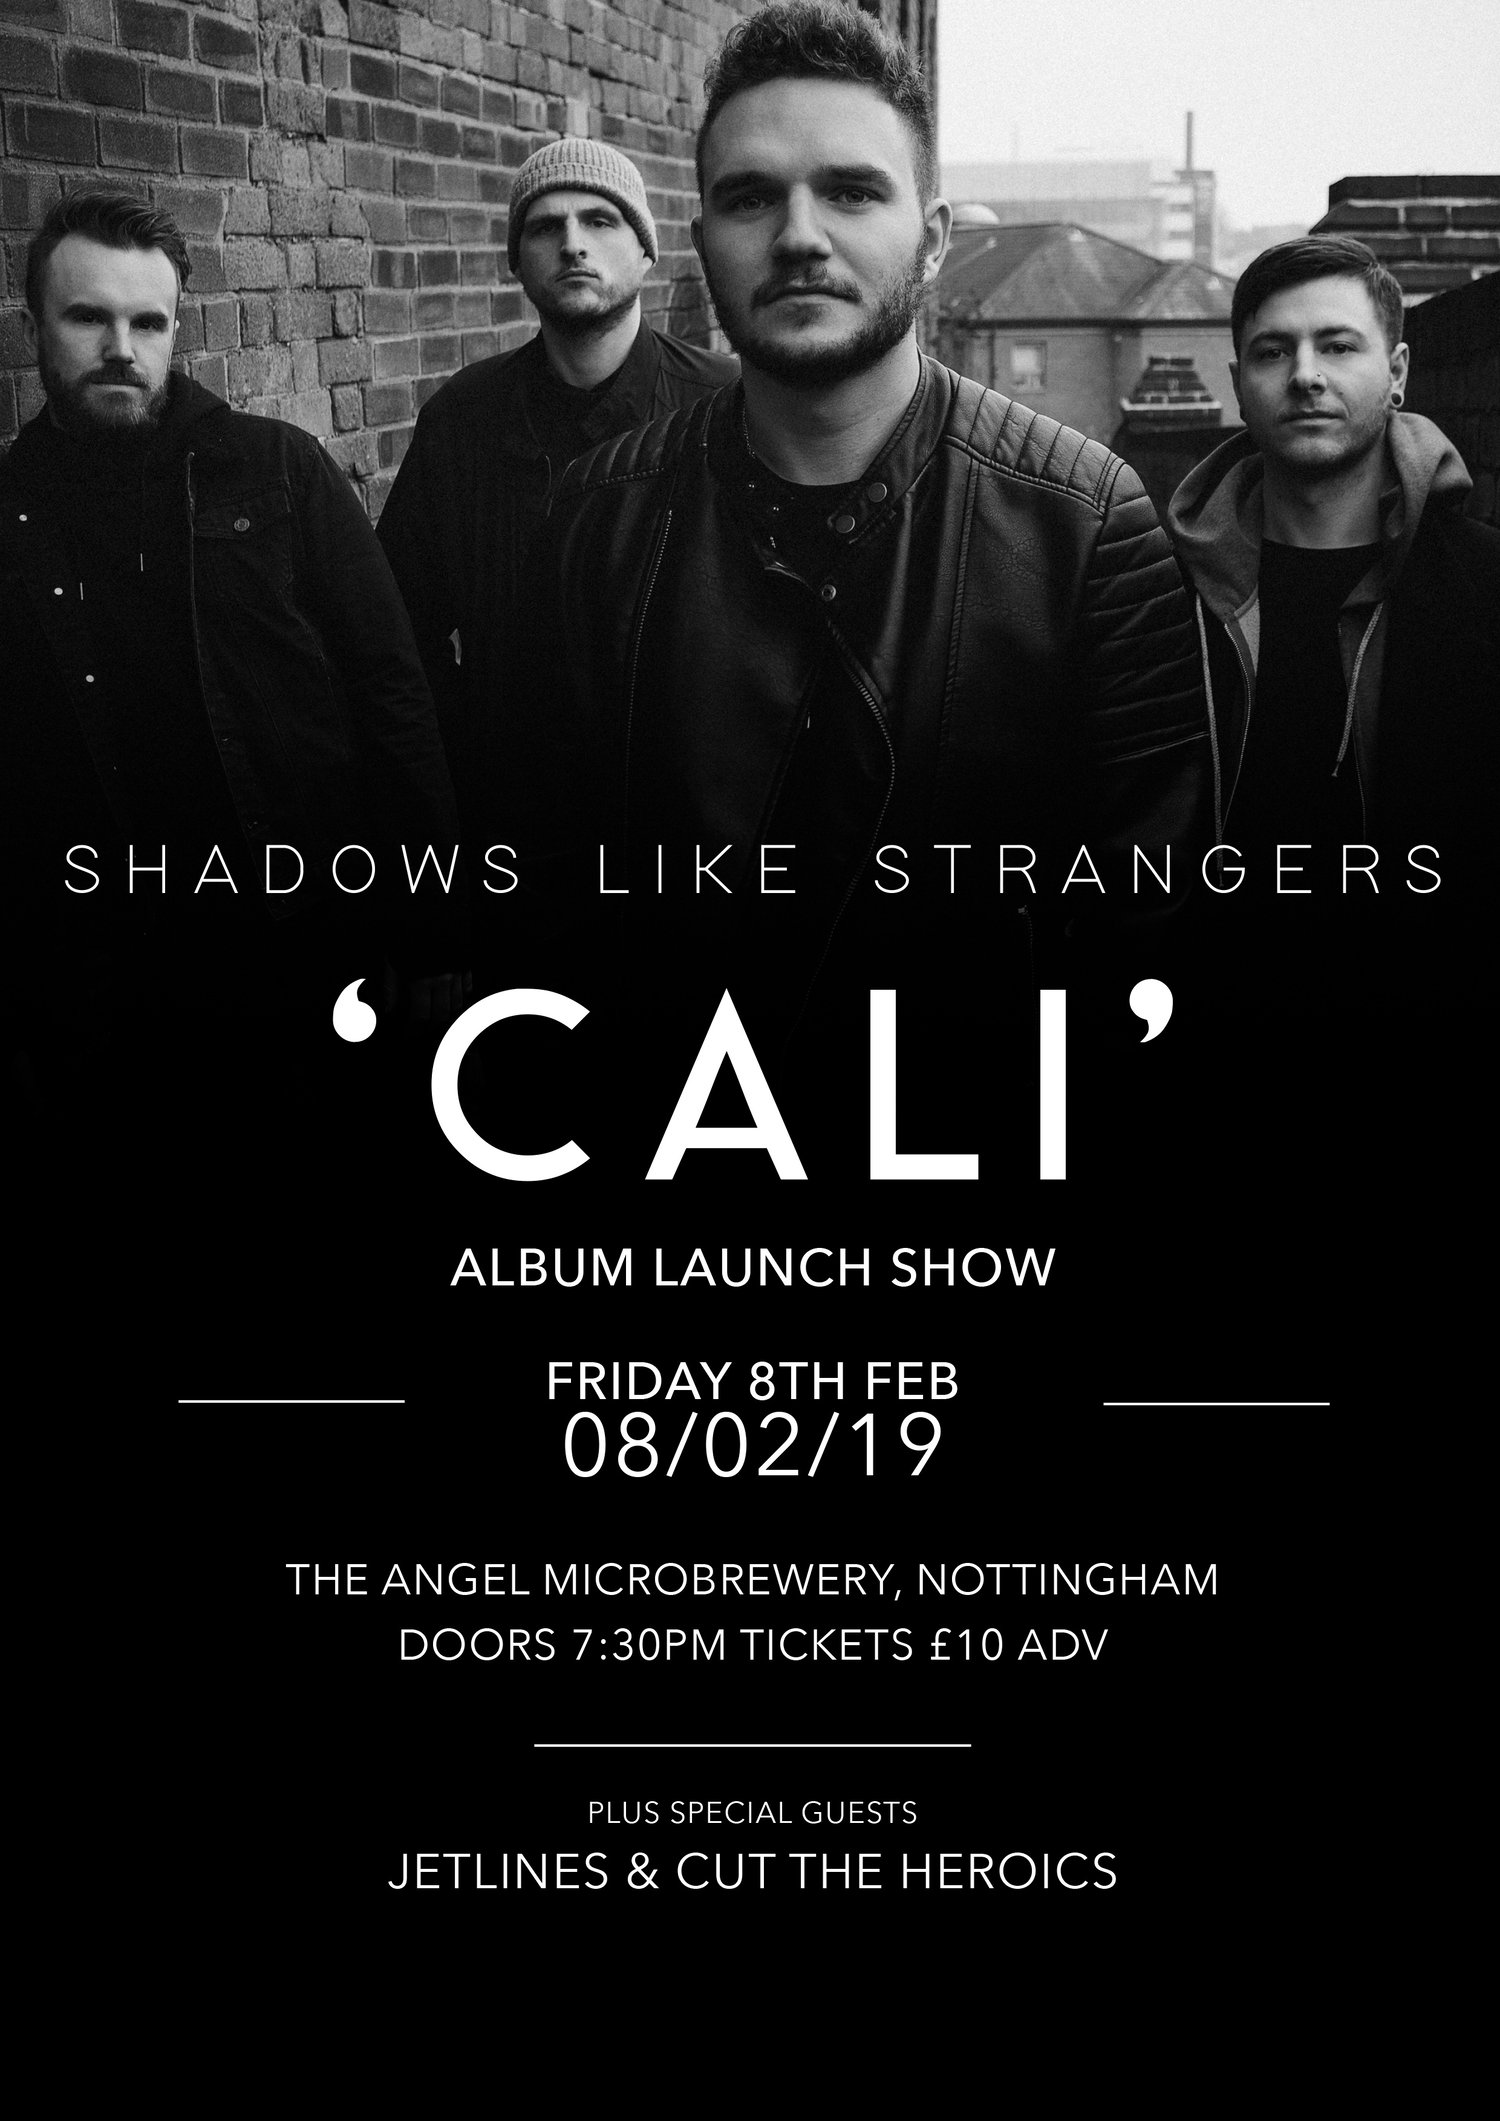 Album Launch Party E-Tickets - The Angel Microbrewery - 08/02/19